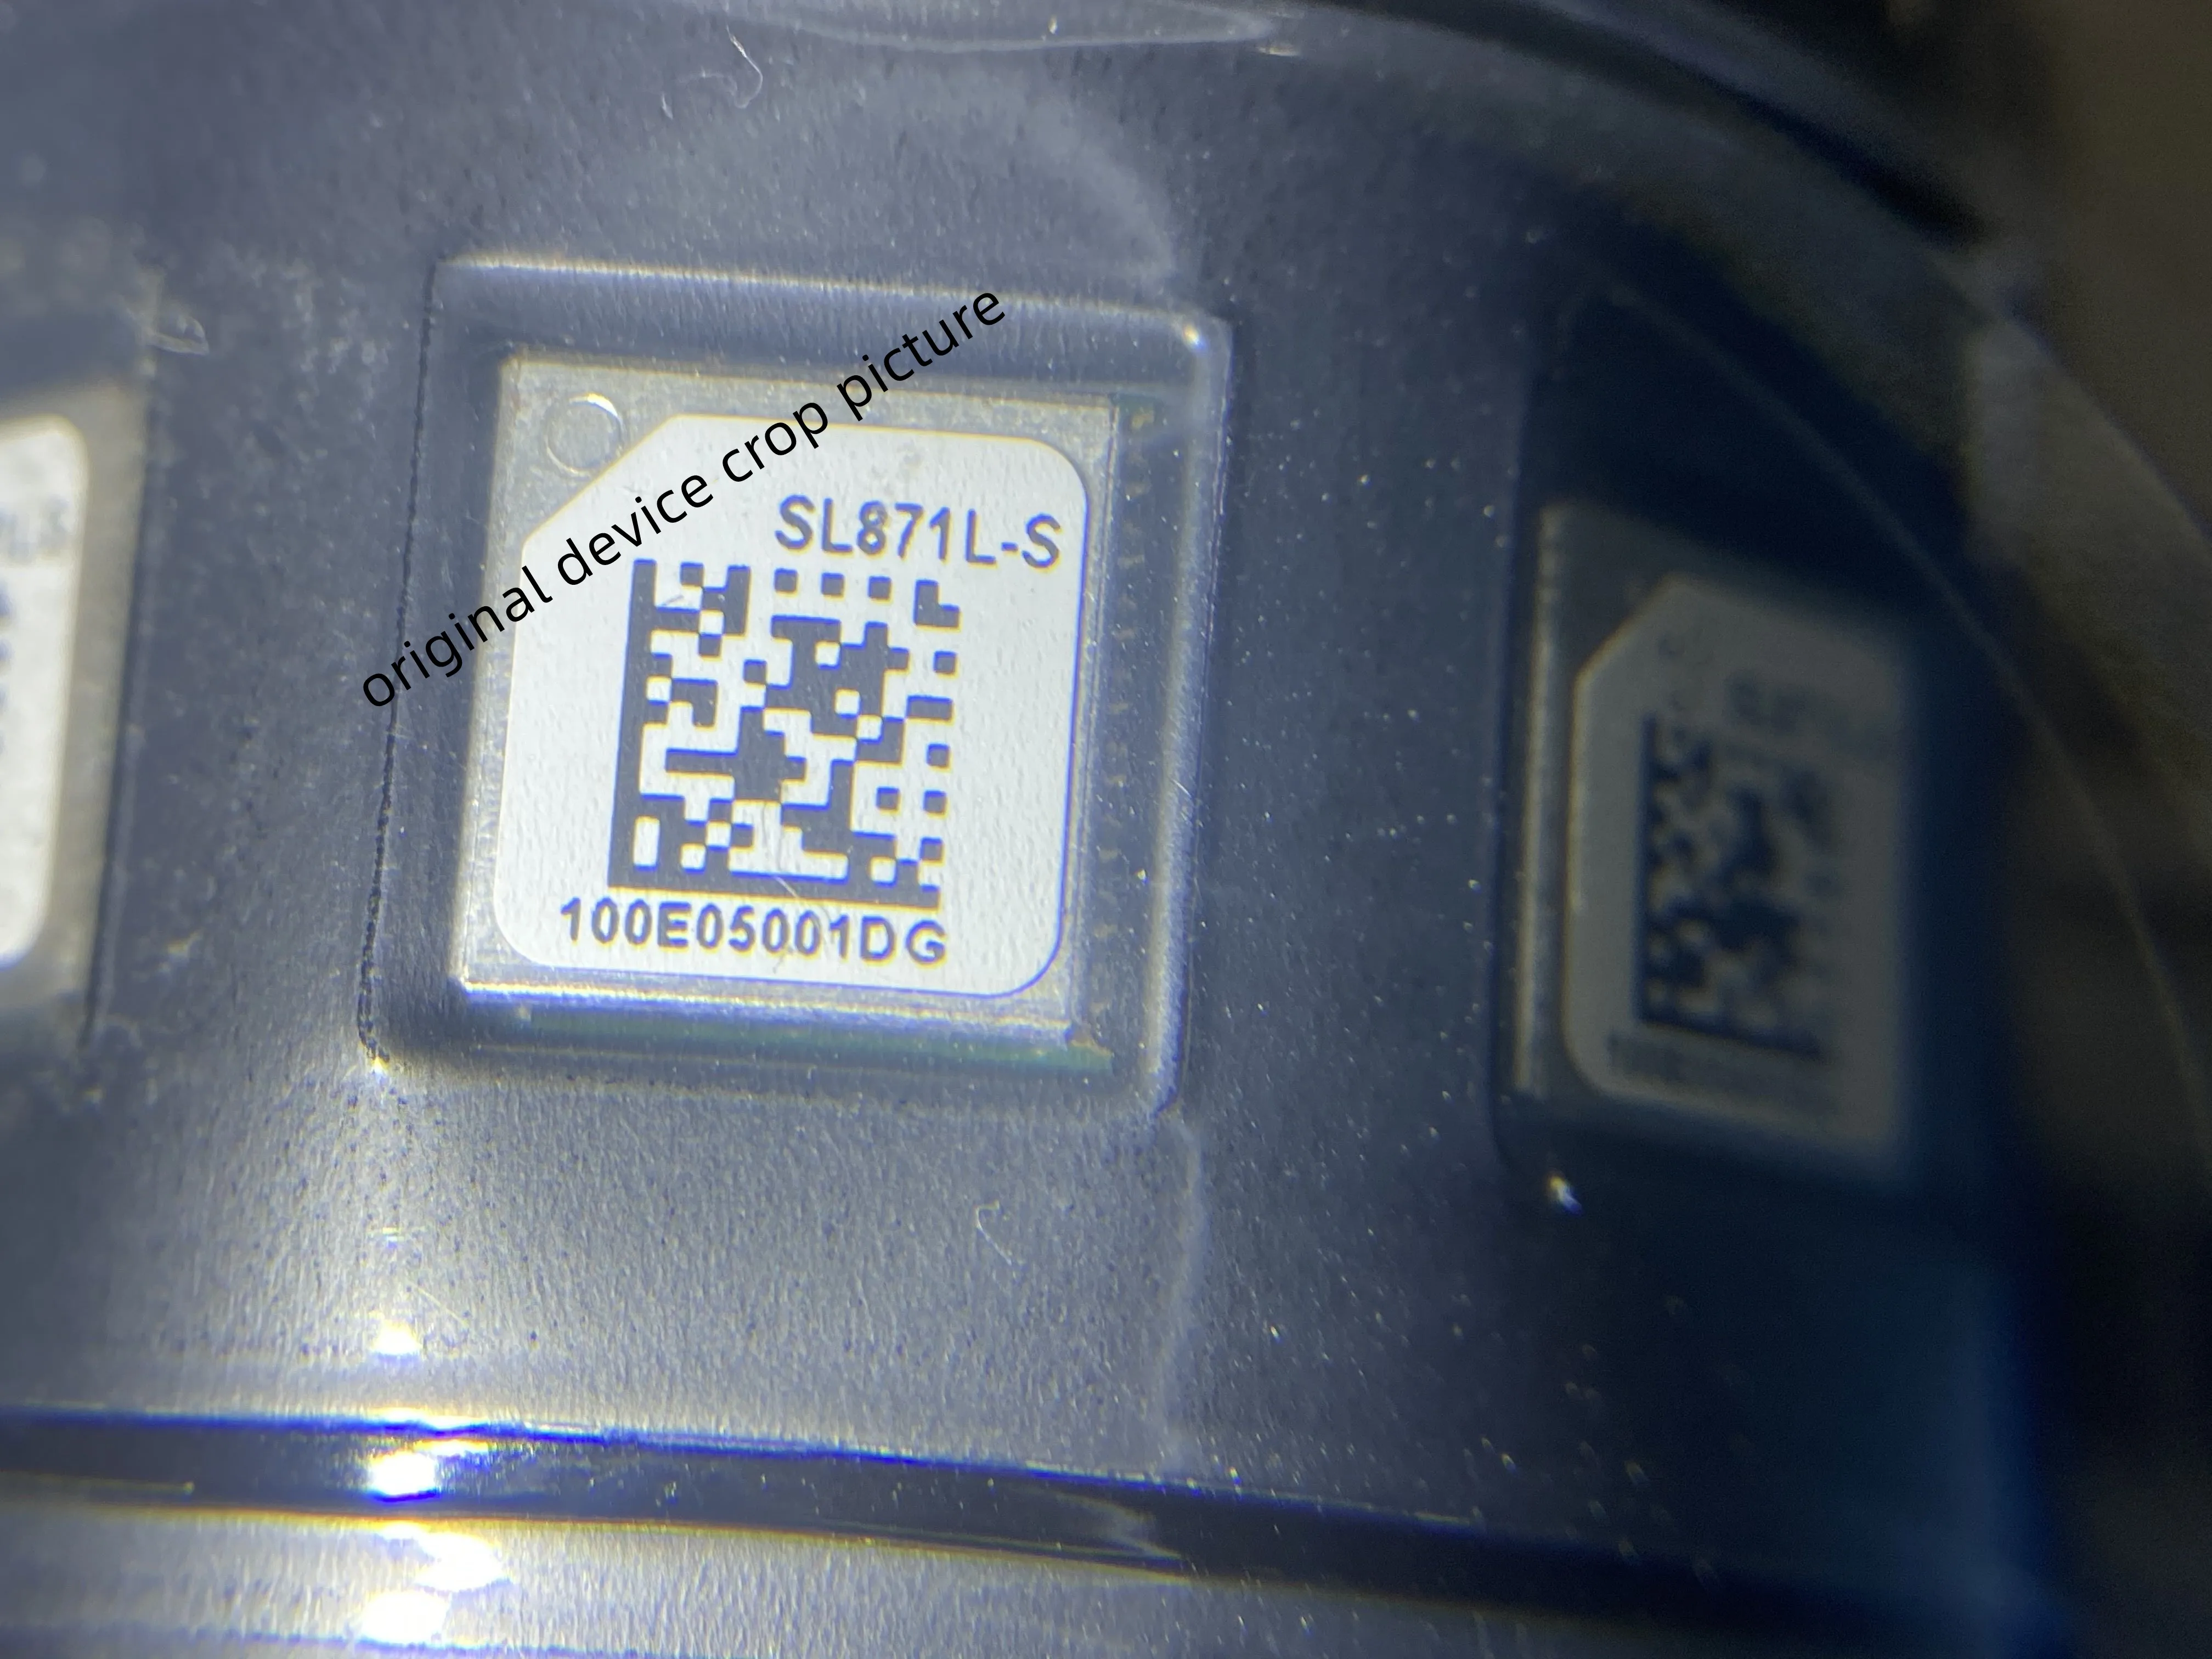 New Original SL871L-S SL871 SL871L SL871LS3232R001  MT3333TTFF 35s positioning accuracy GPS MODULE new original decawave dwm1000 position module ultra wideband indoor uwb positioning module for difference positioning system